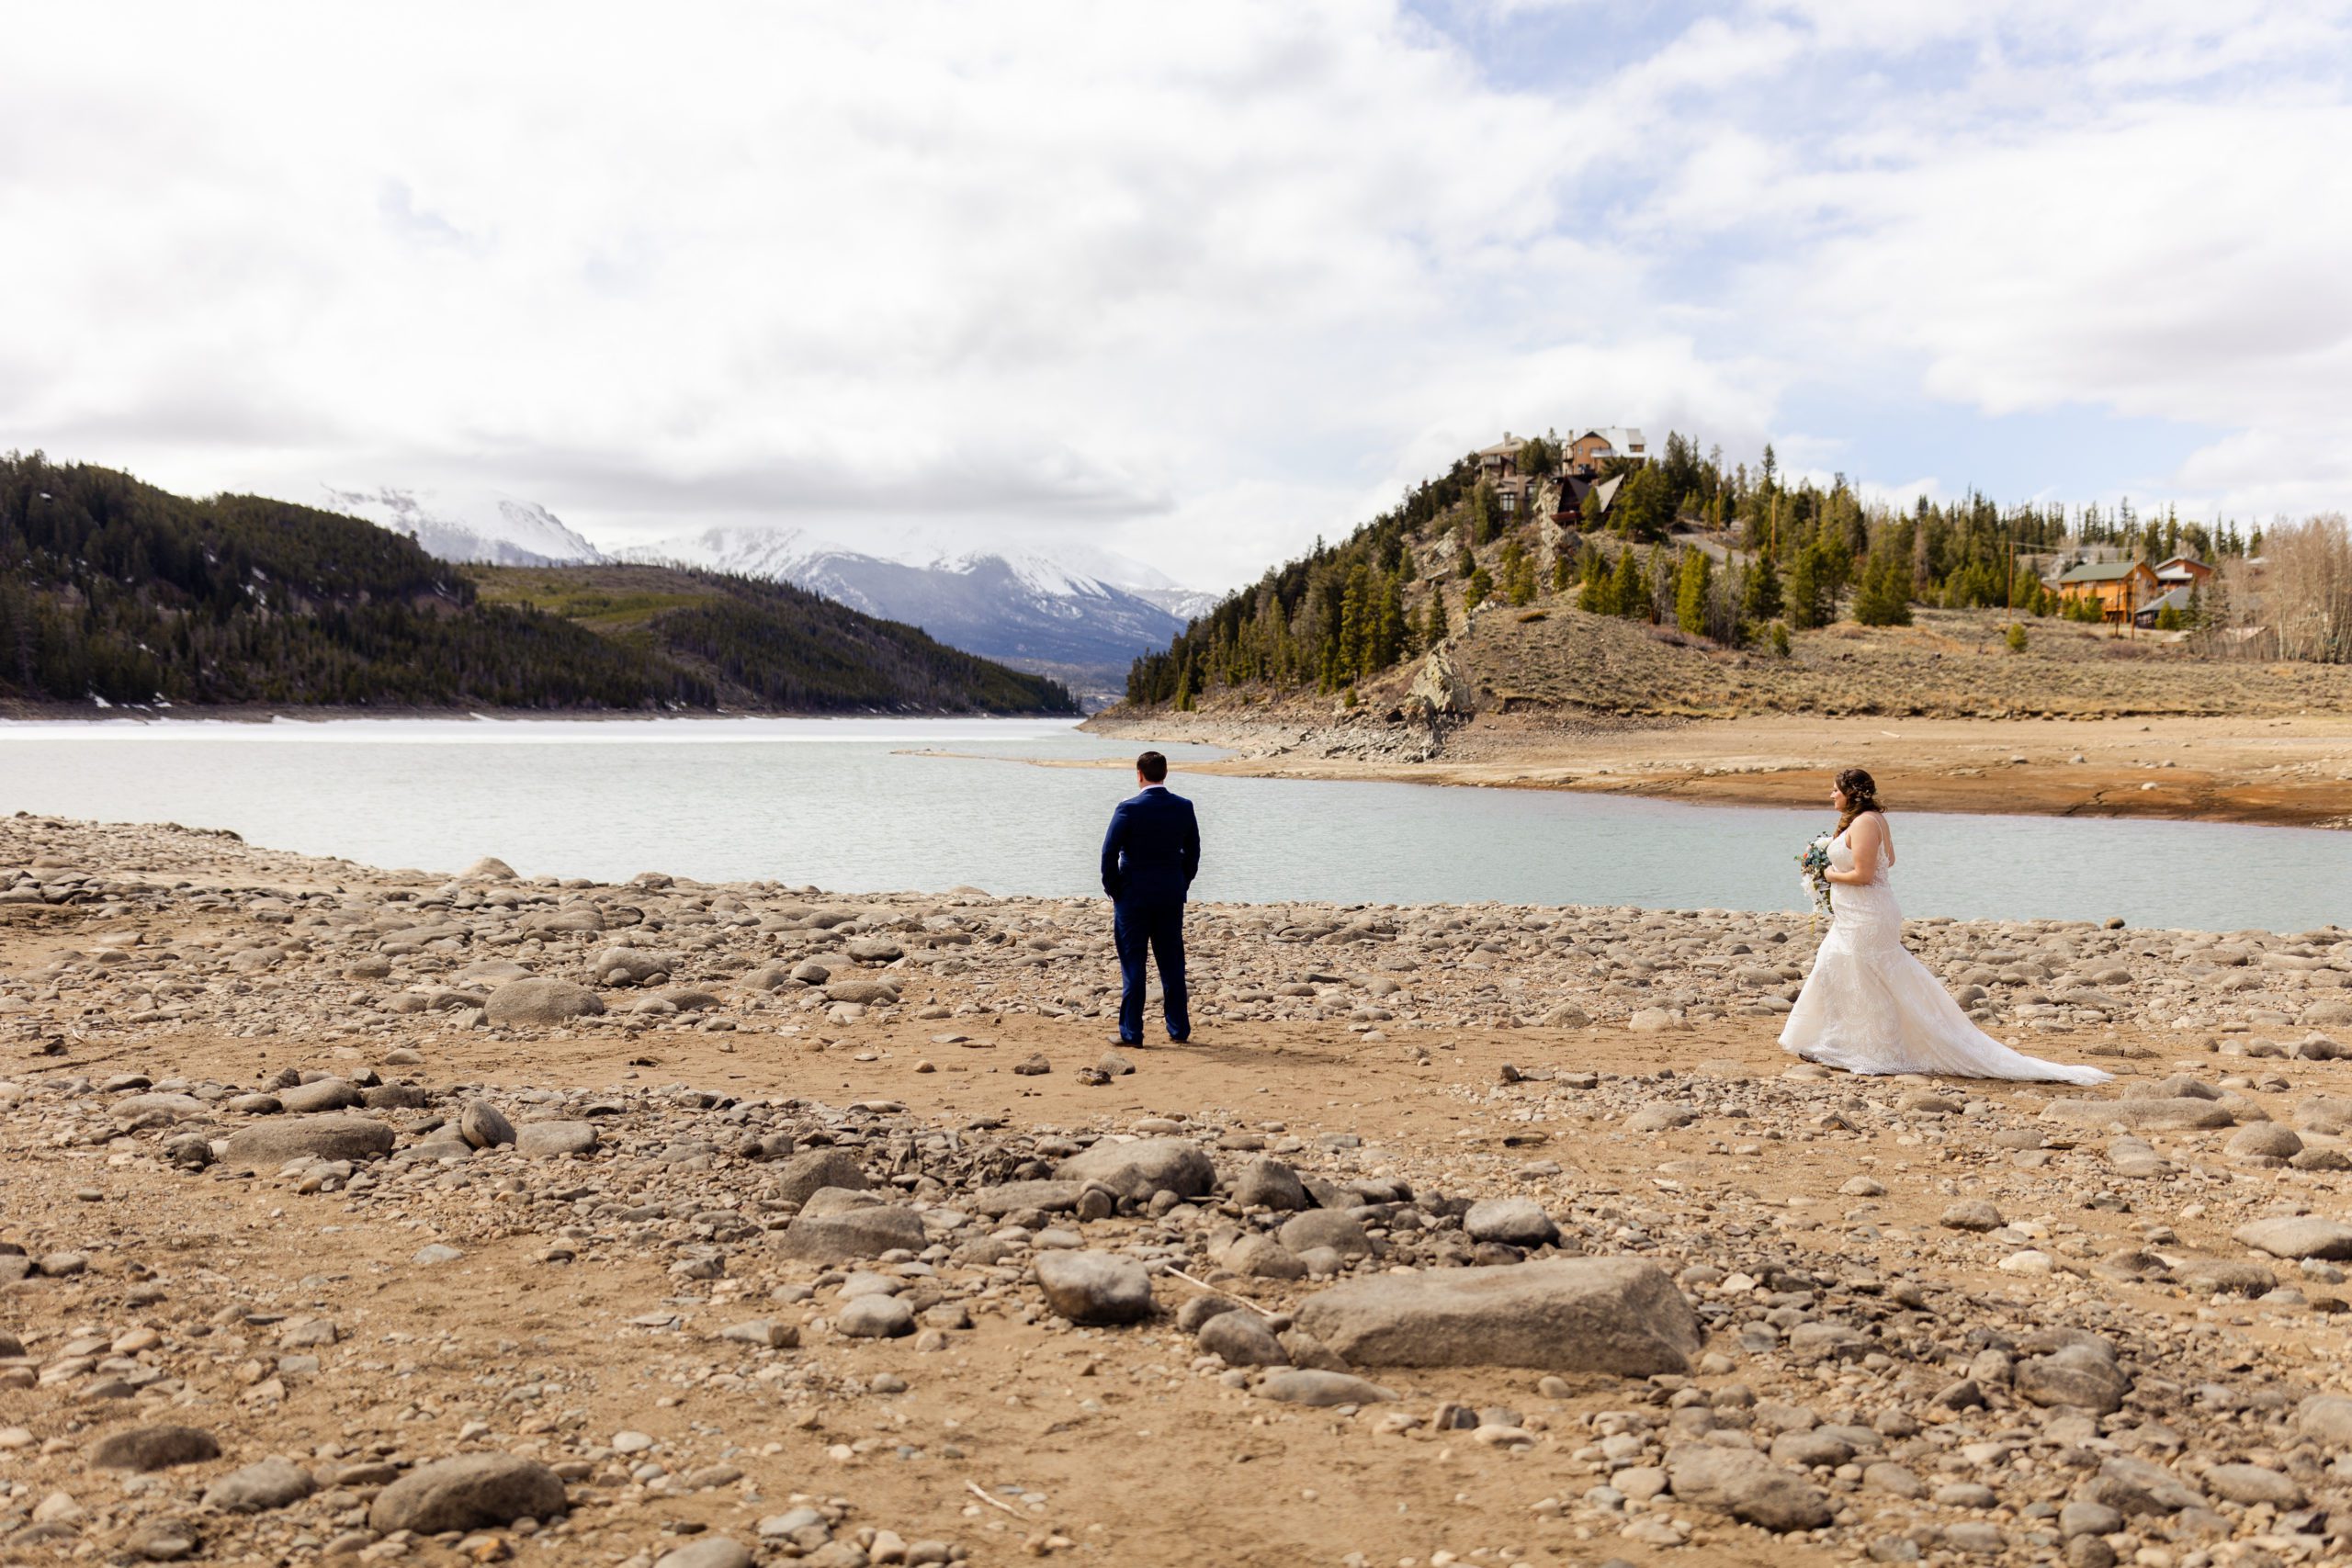 The bride and groom before their first look. Prior to their Sapphire Point Elopement.